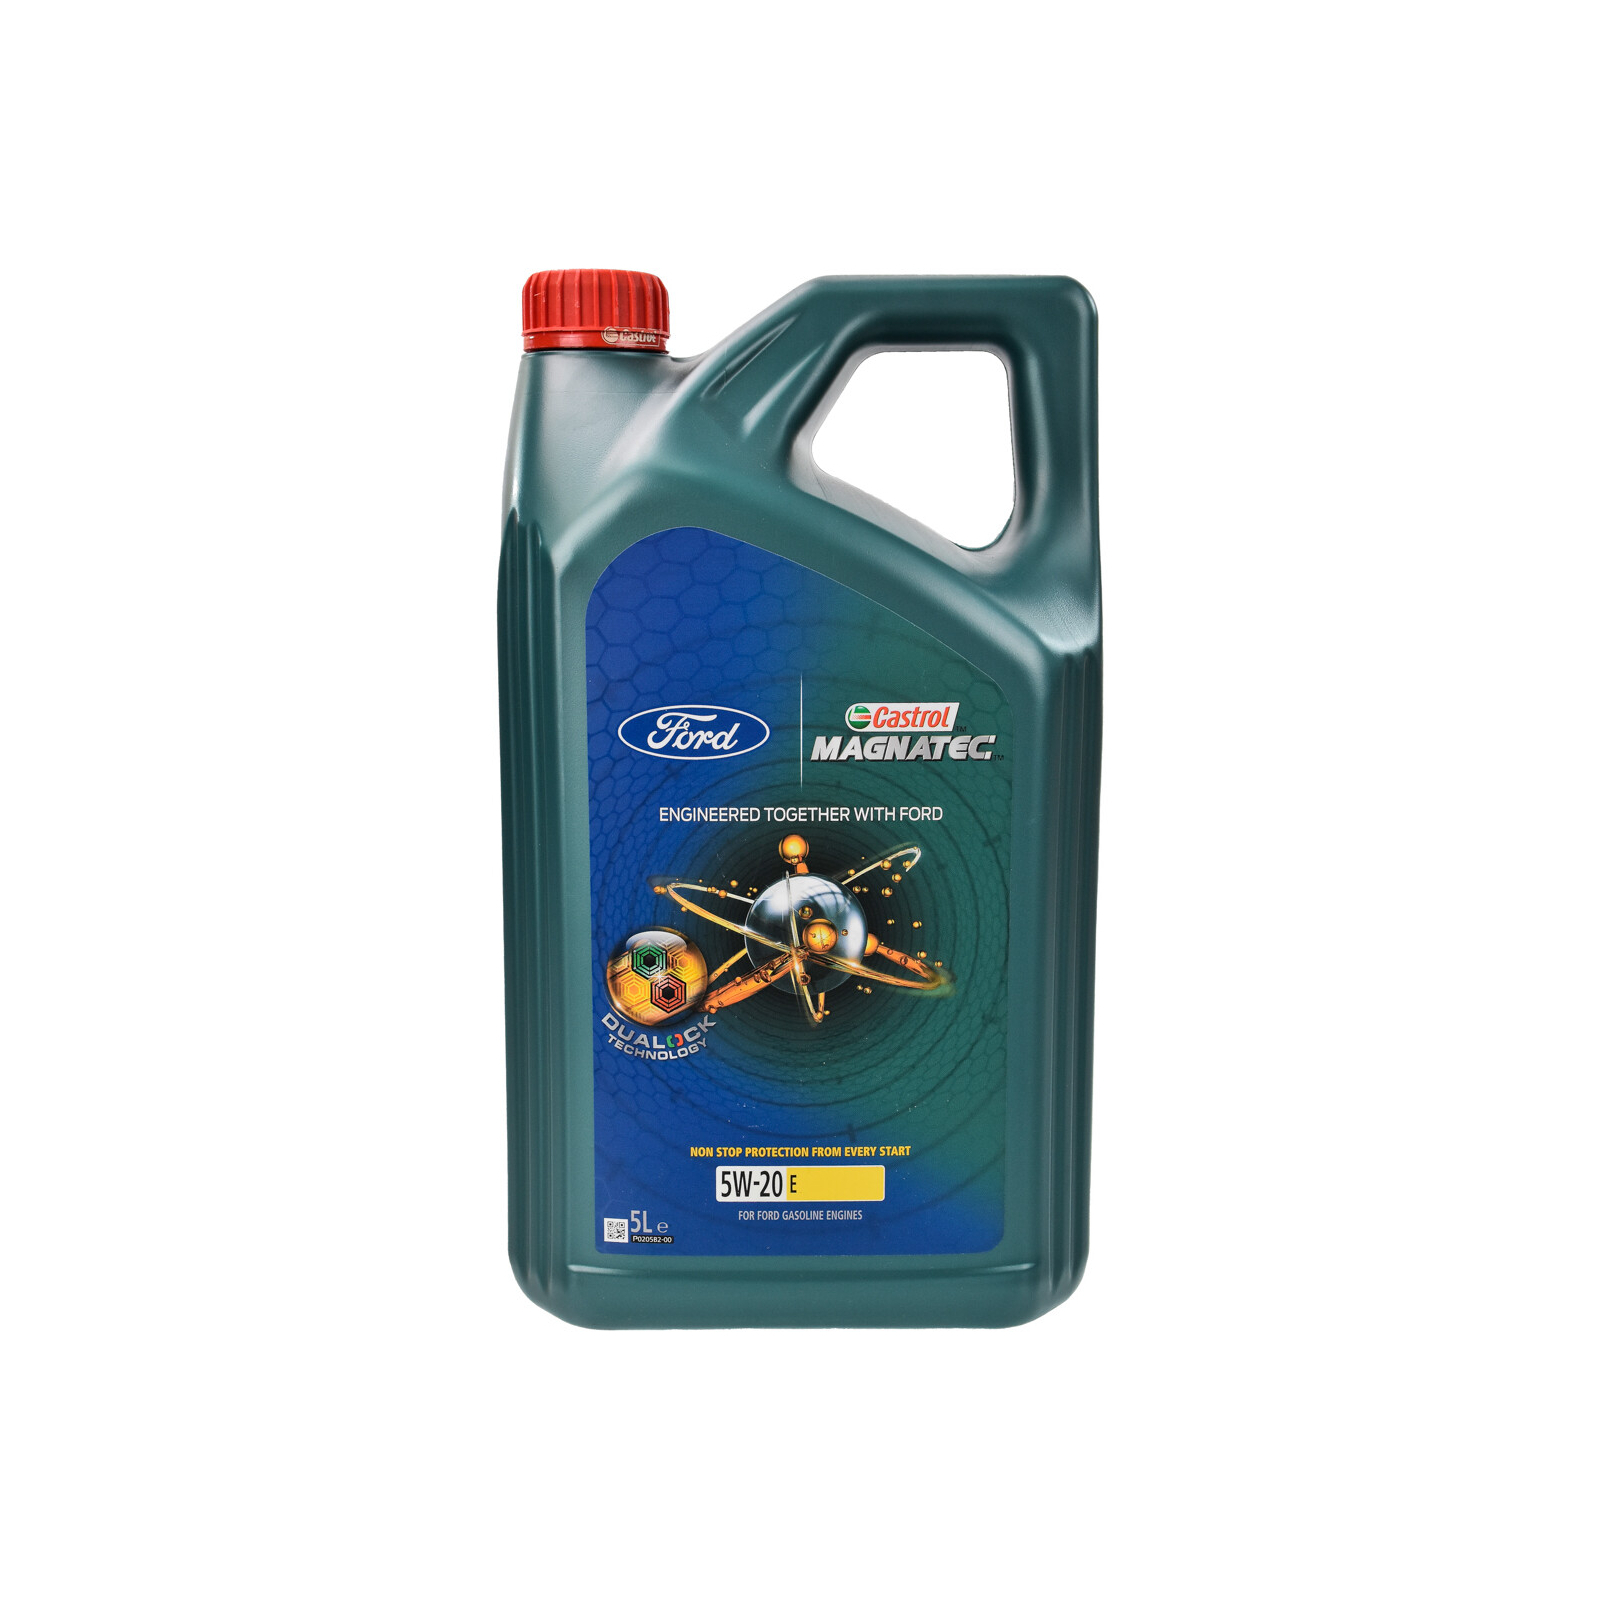 Моторное масло Ford Castrol Magnatec Professional E 5W-20 5л (151A95)